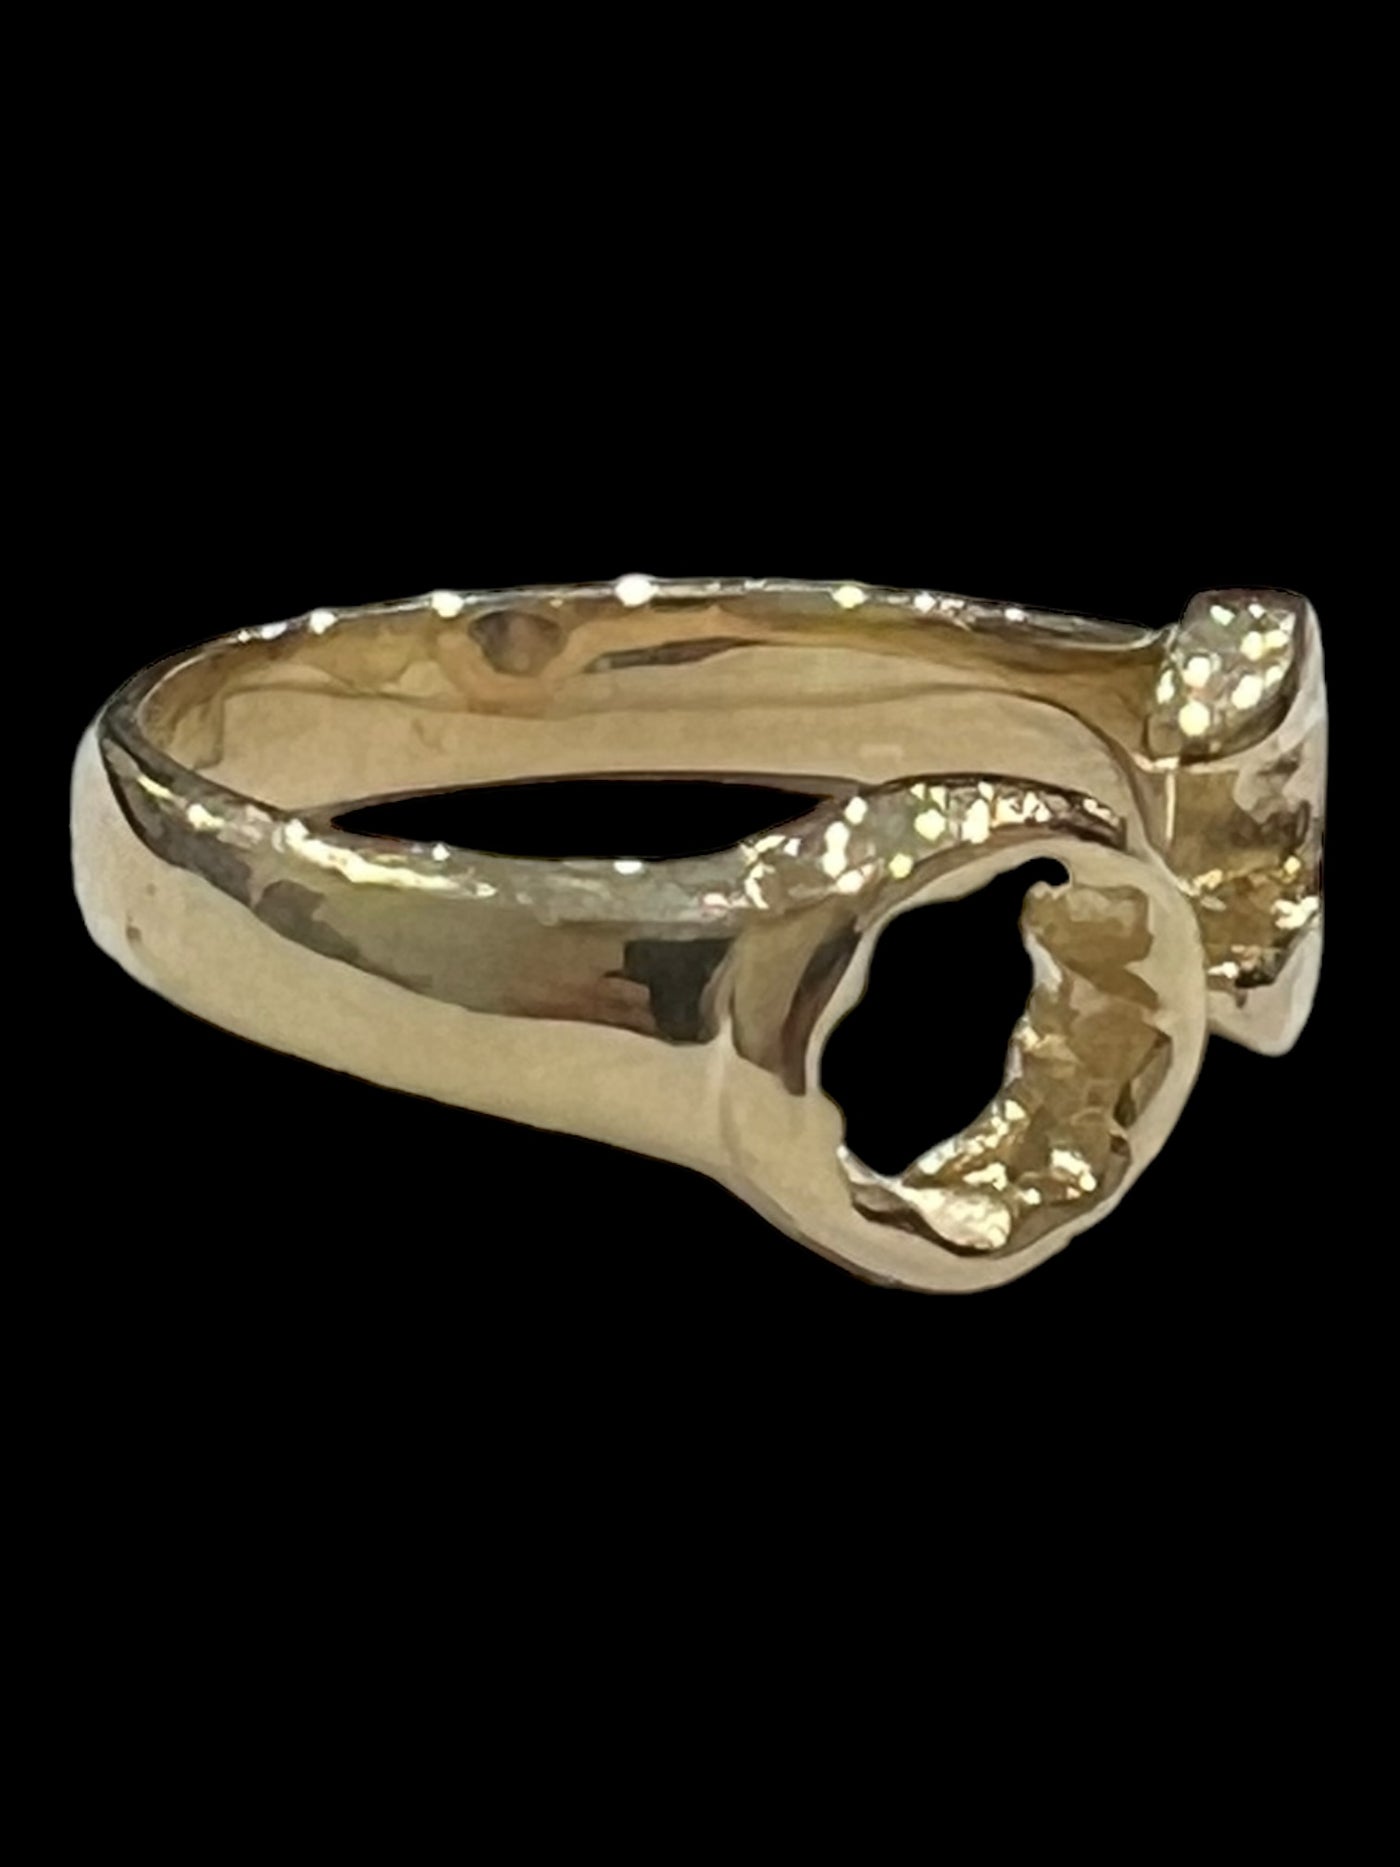 9CT SPANNER WRENCH RING